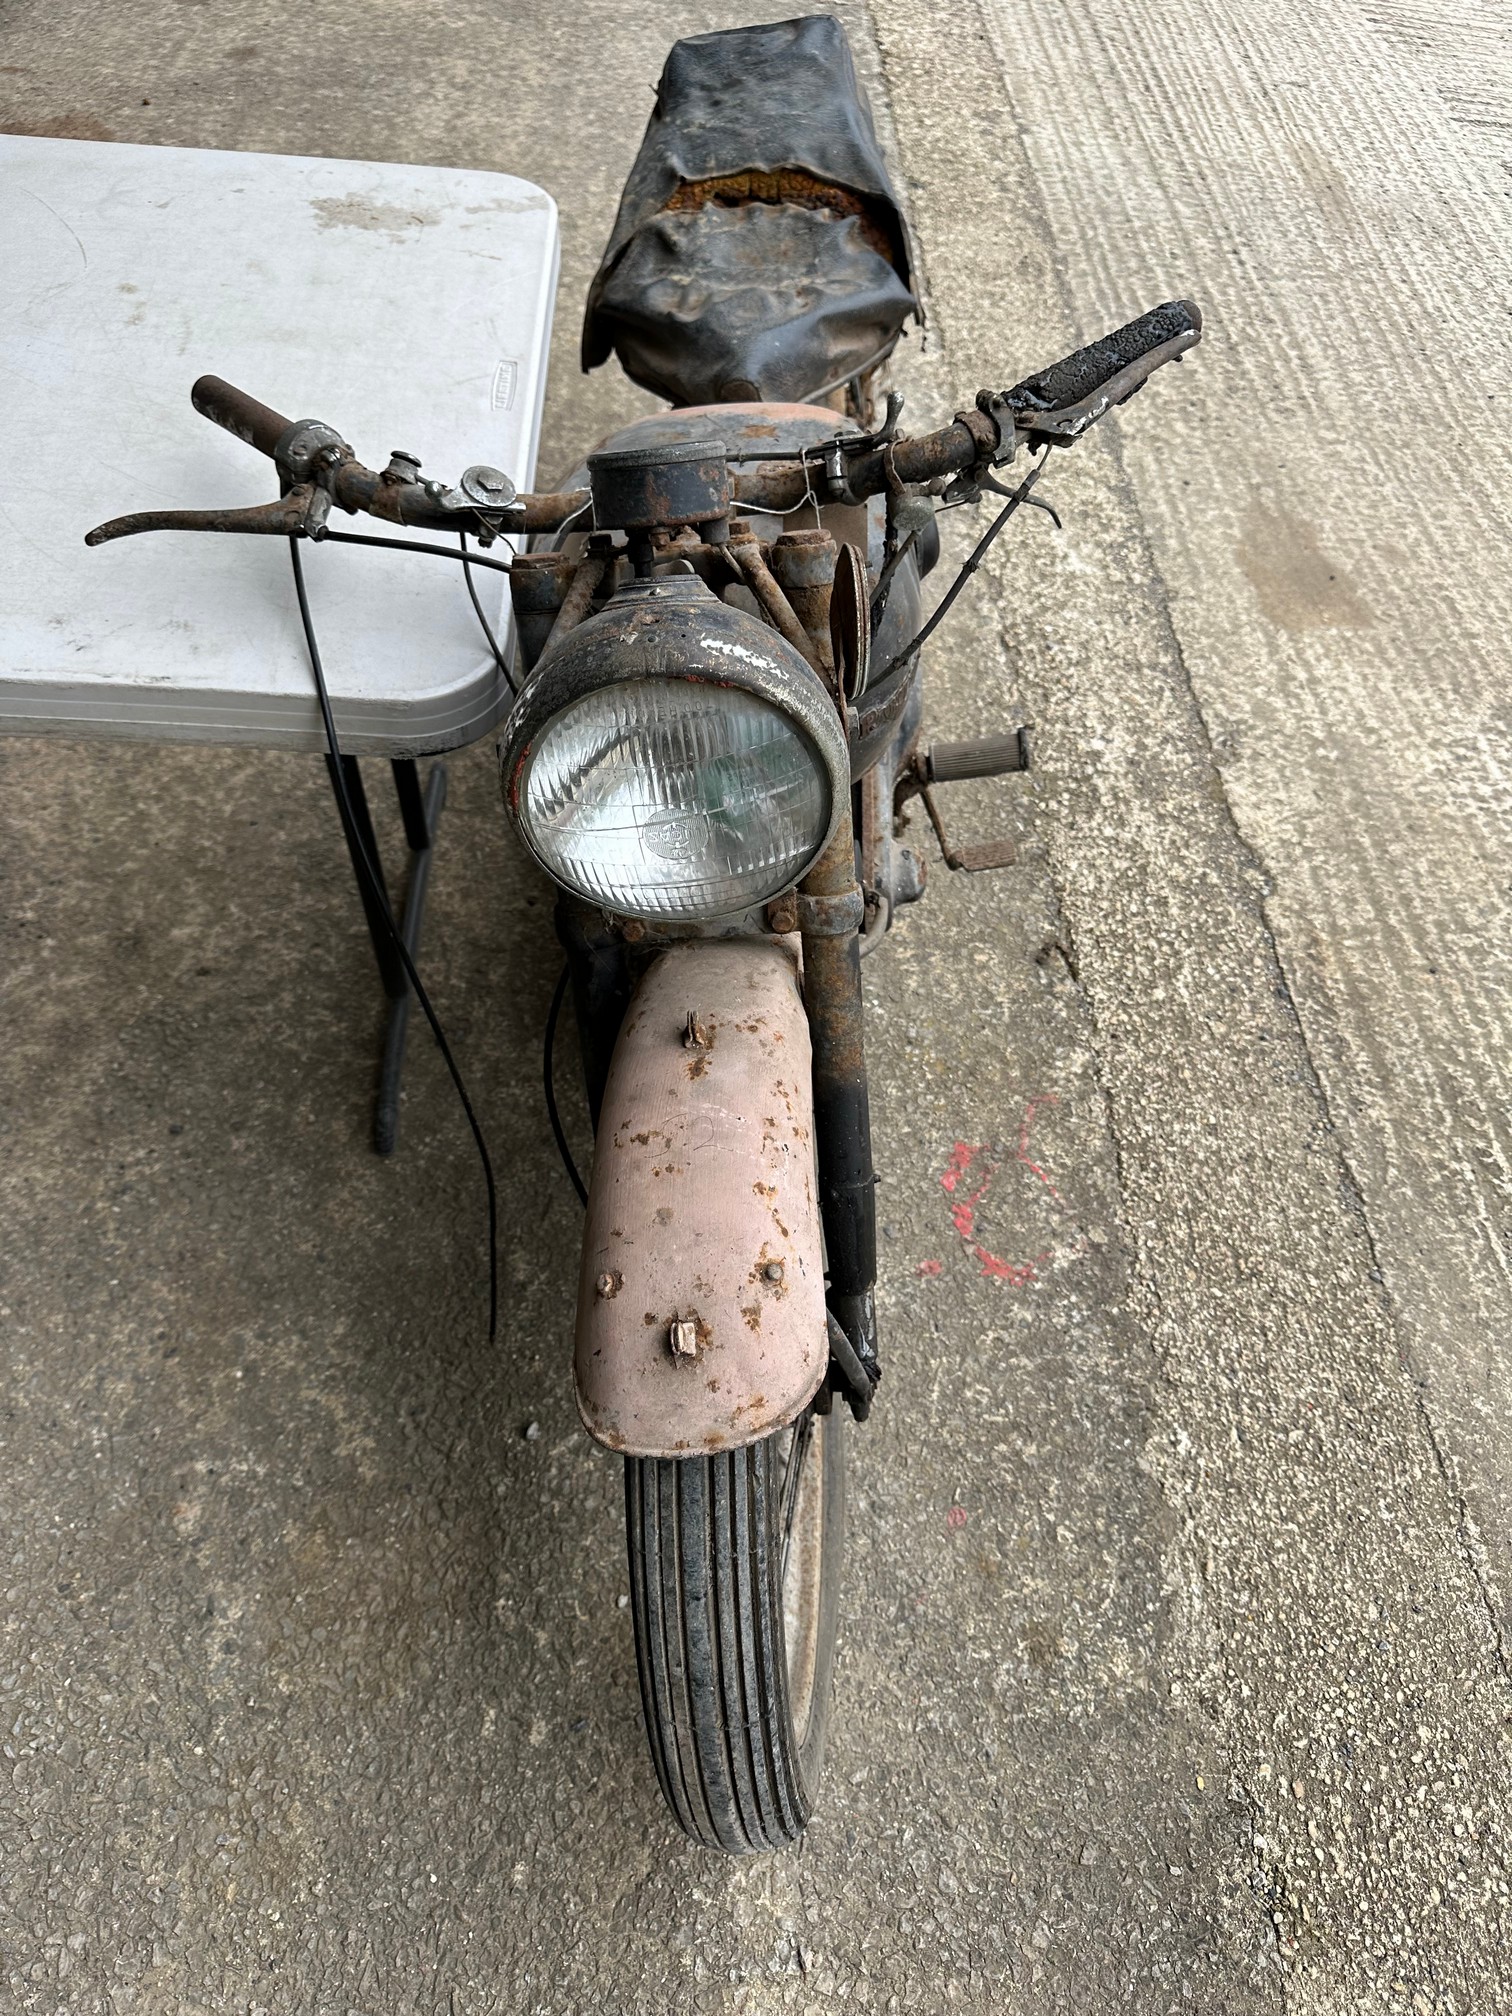 1952 PANTHER MODEL 75 348cc RESTORATION PROJECT - Image 5 of 6